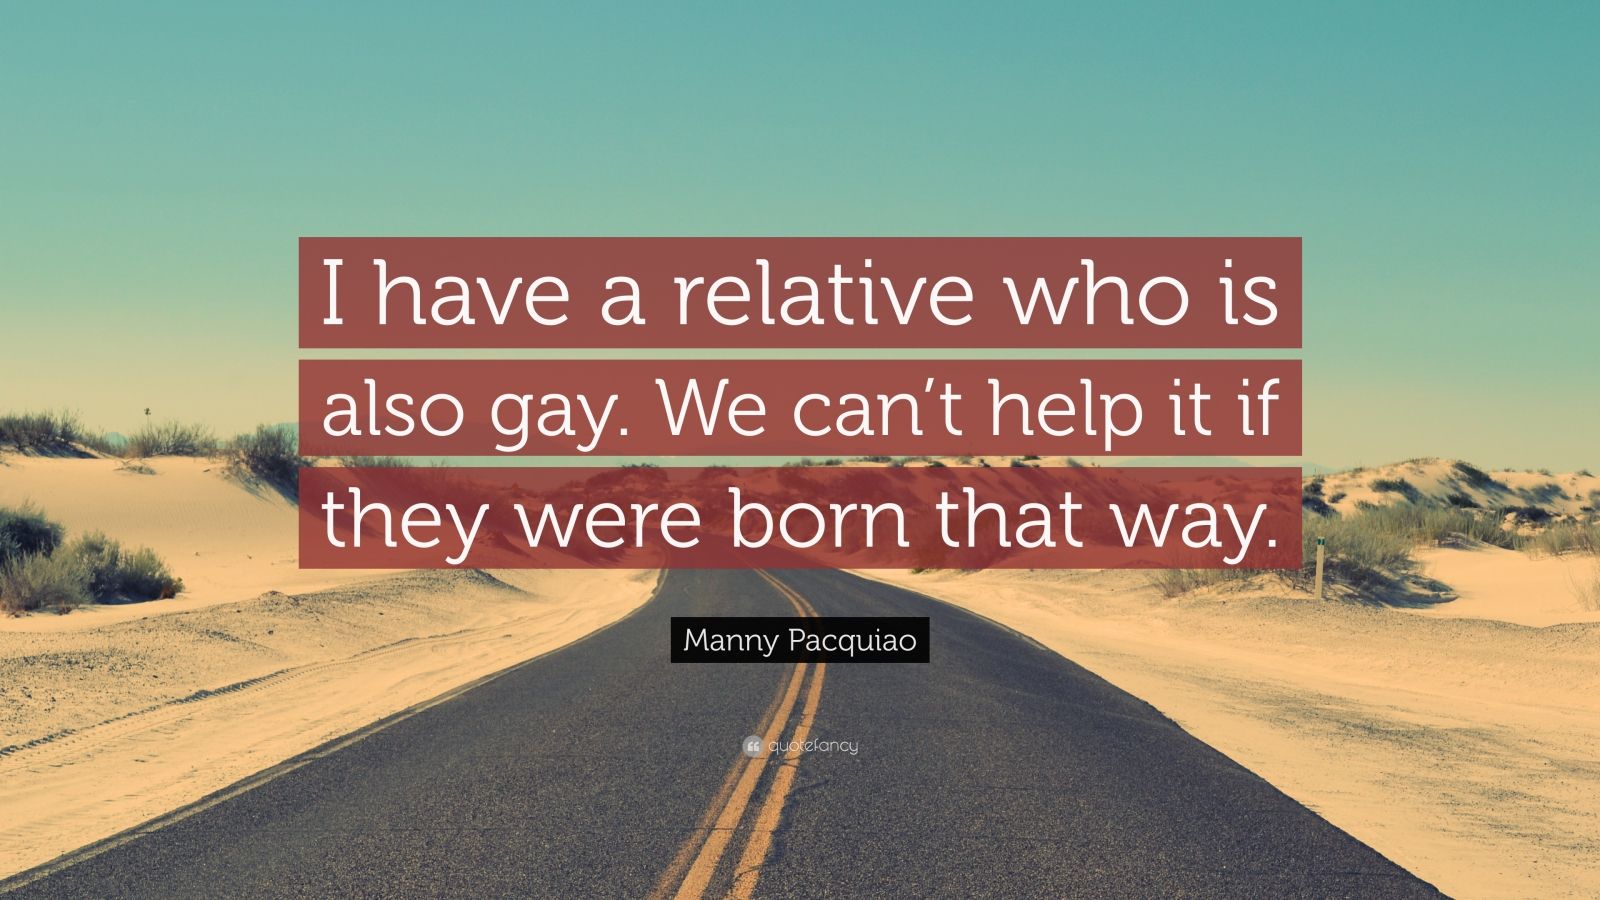 Manny Pacquiao Quote: “I have a relative who is also gay. We can't help it  if they were born that way.”